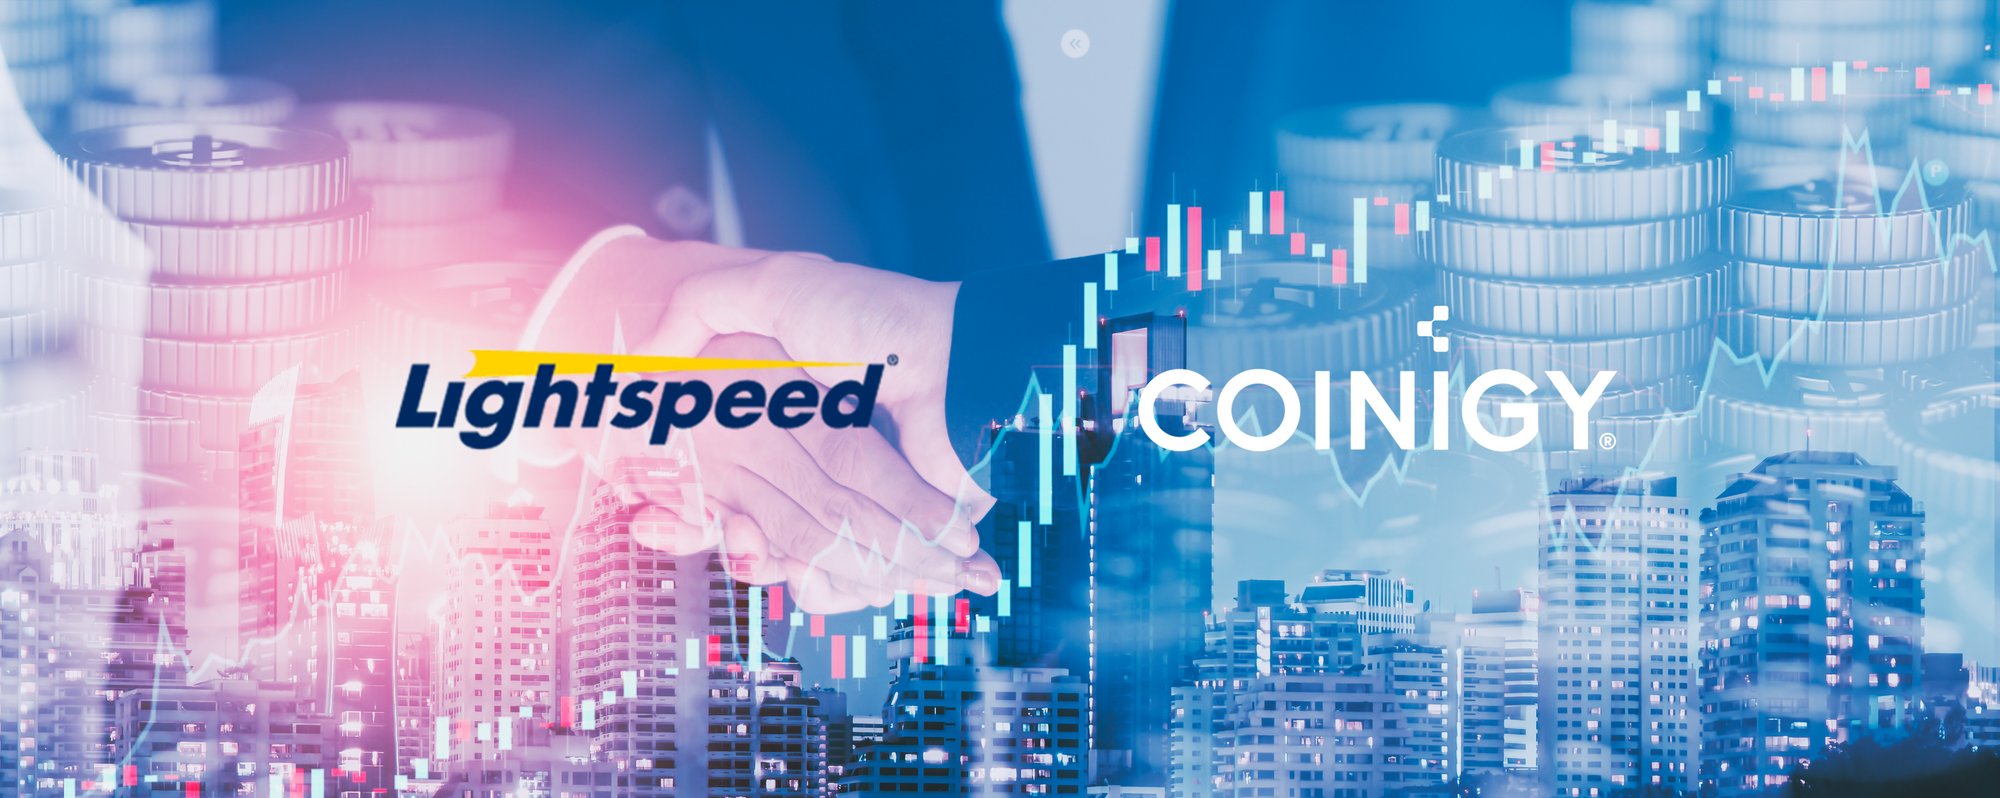 Lightspeed Crypto Acquires Coinigy, One of the Industry’s Leading Crypto Trading Platforms